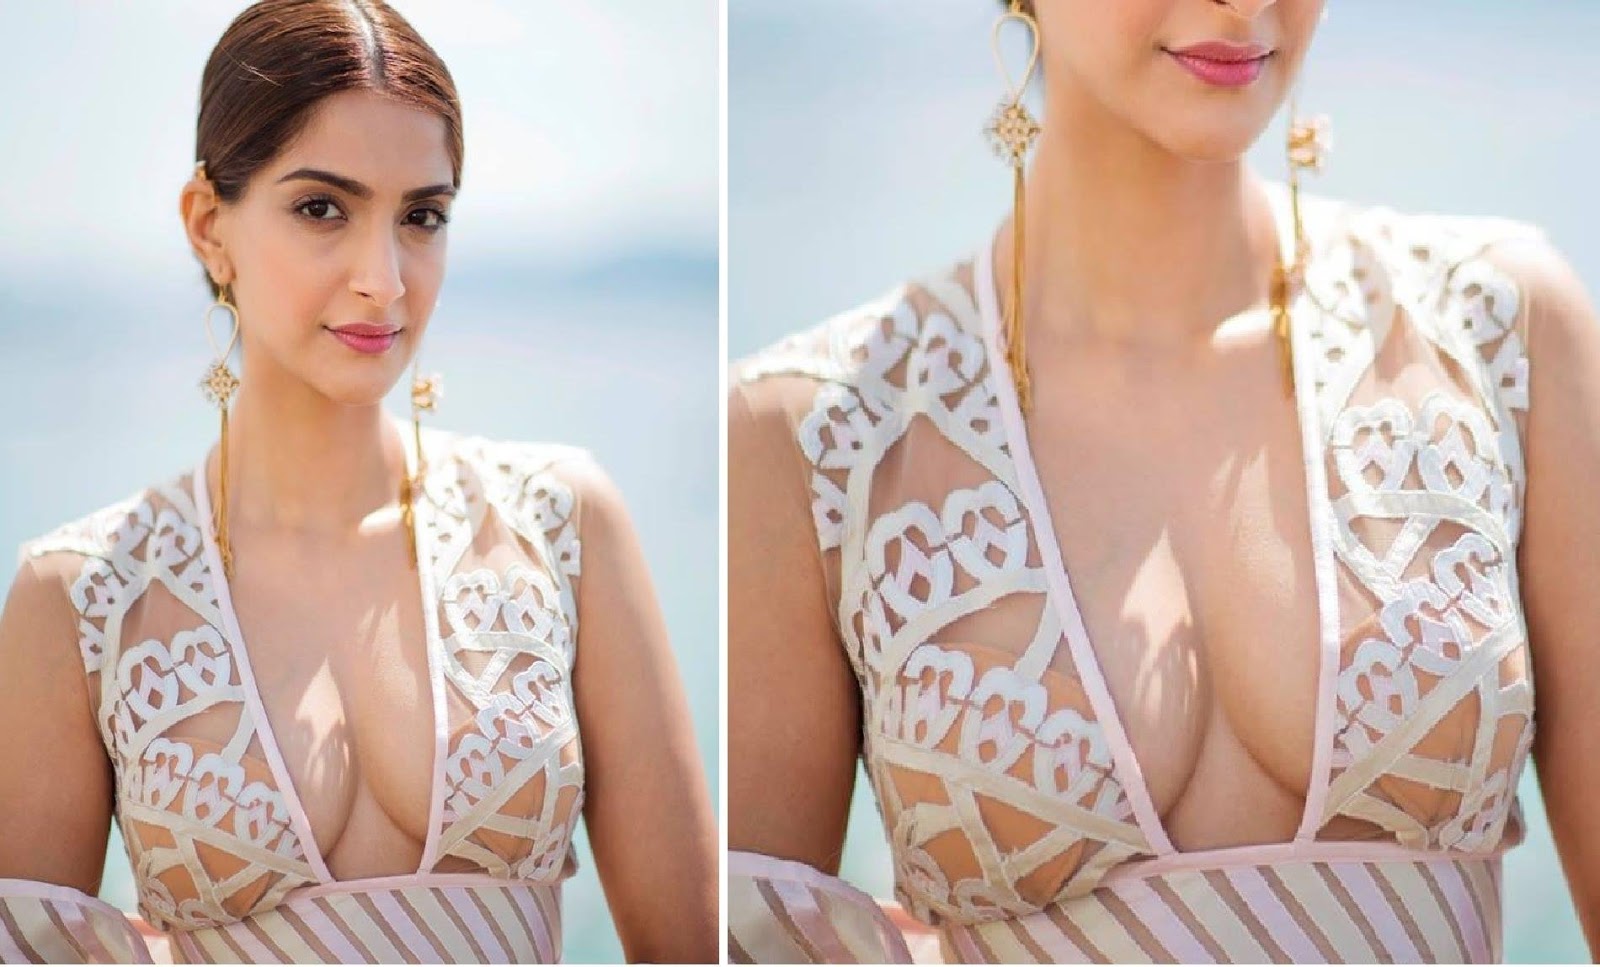 Sonam Kapoor is an Indian actress and model. 